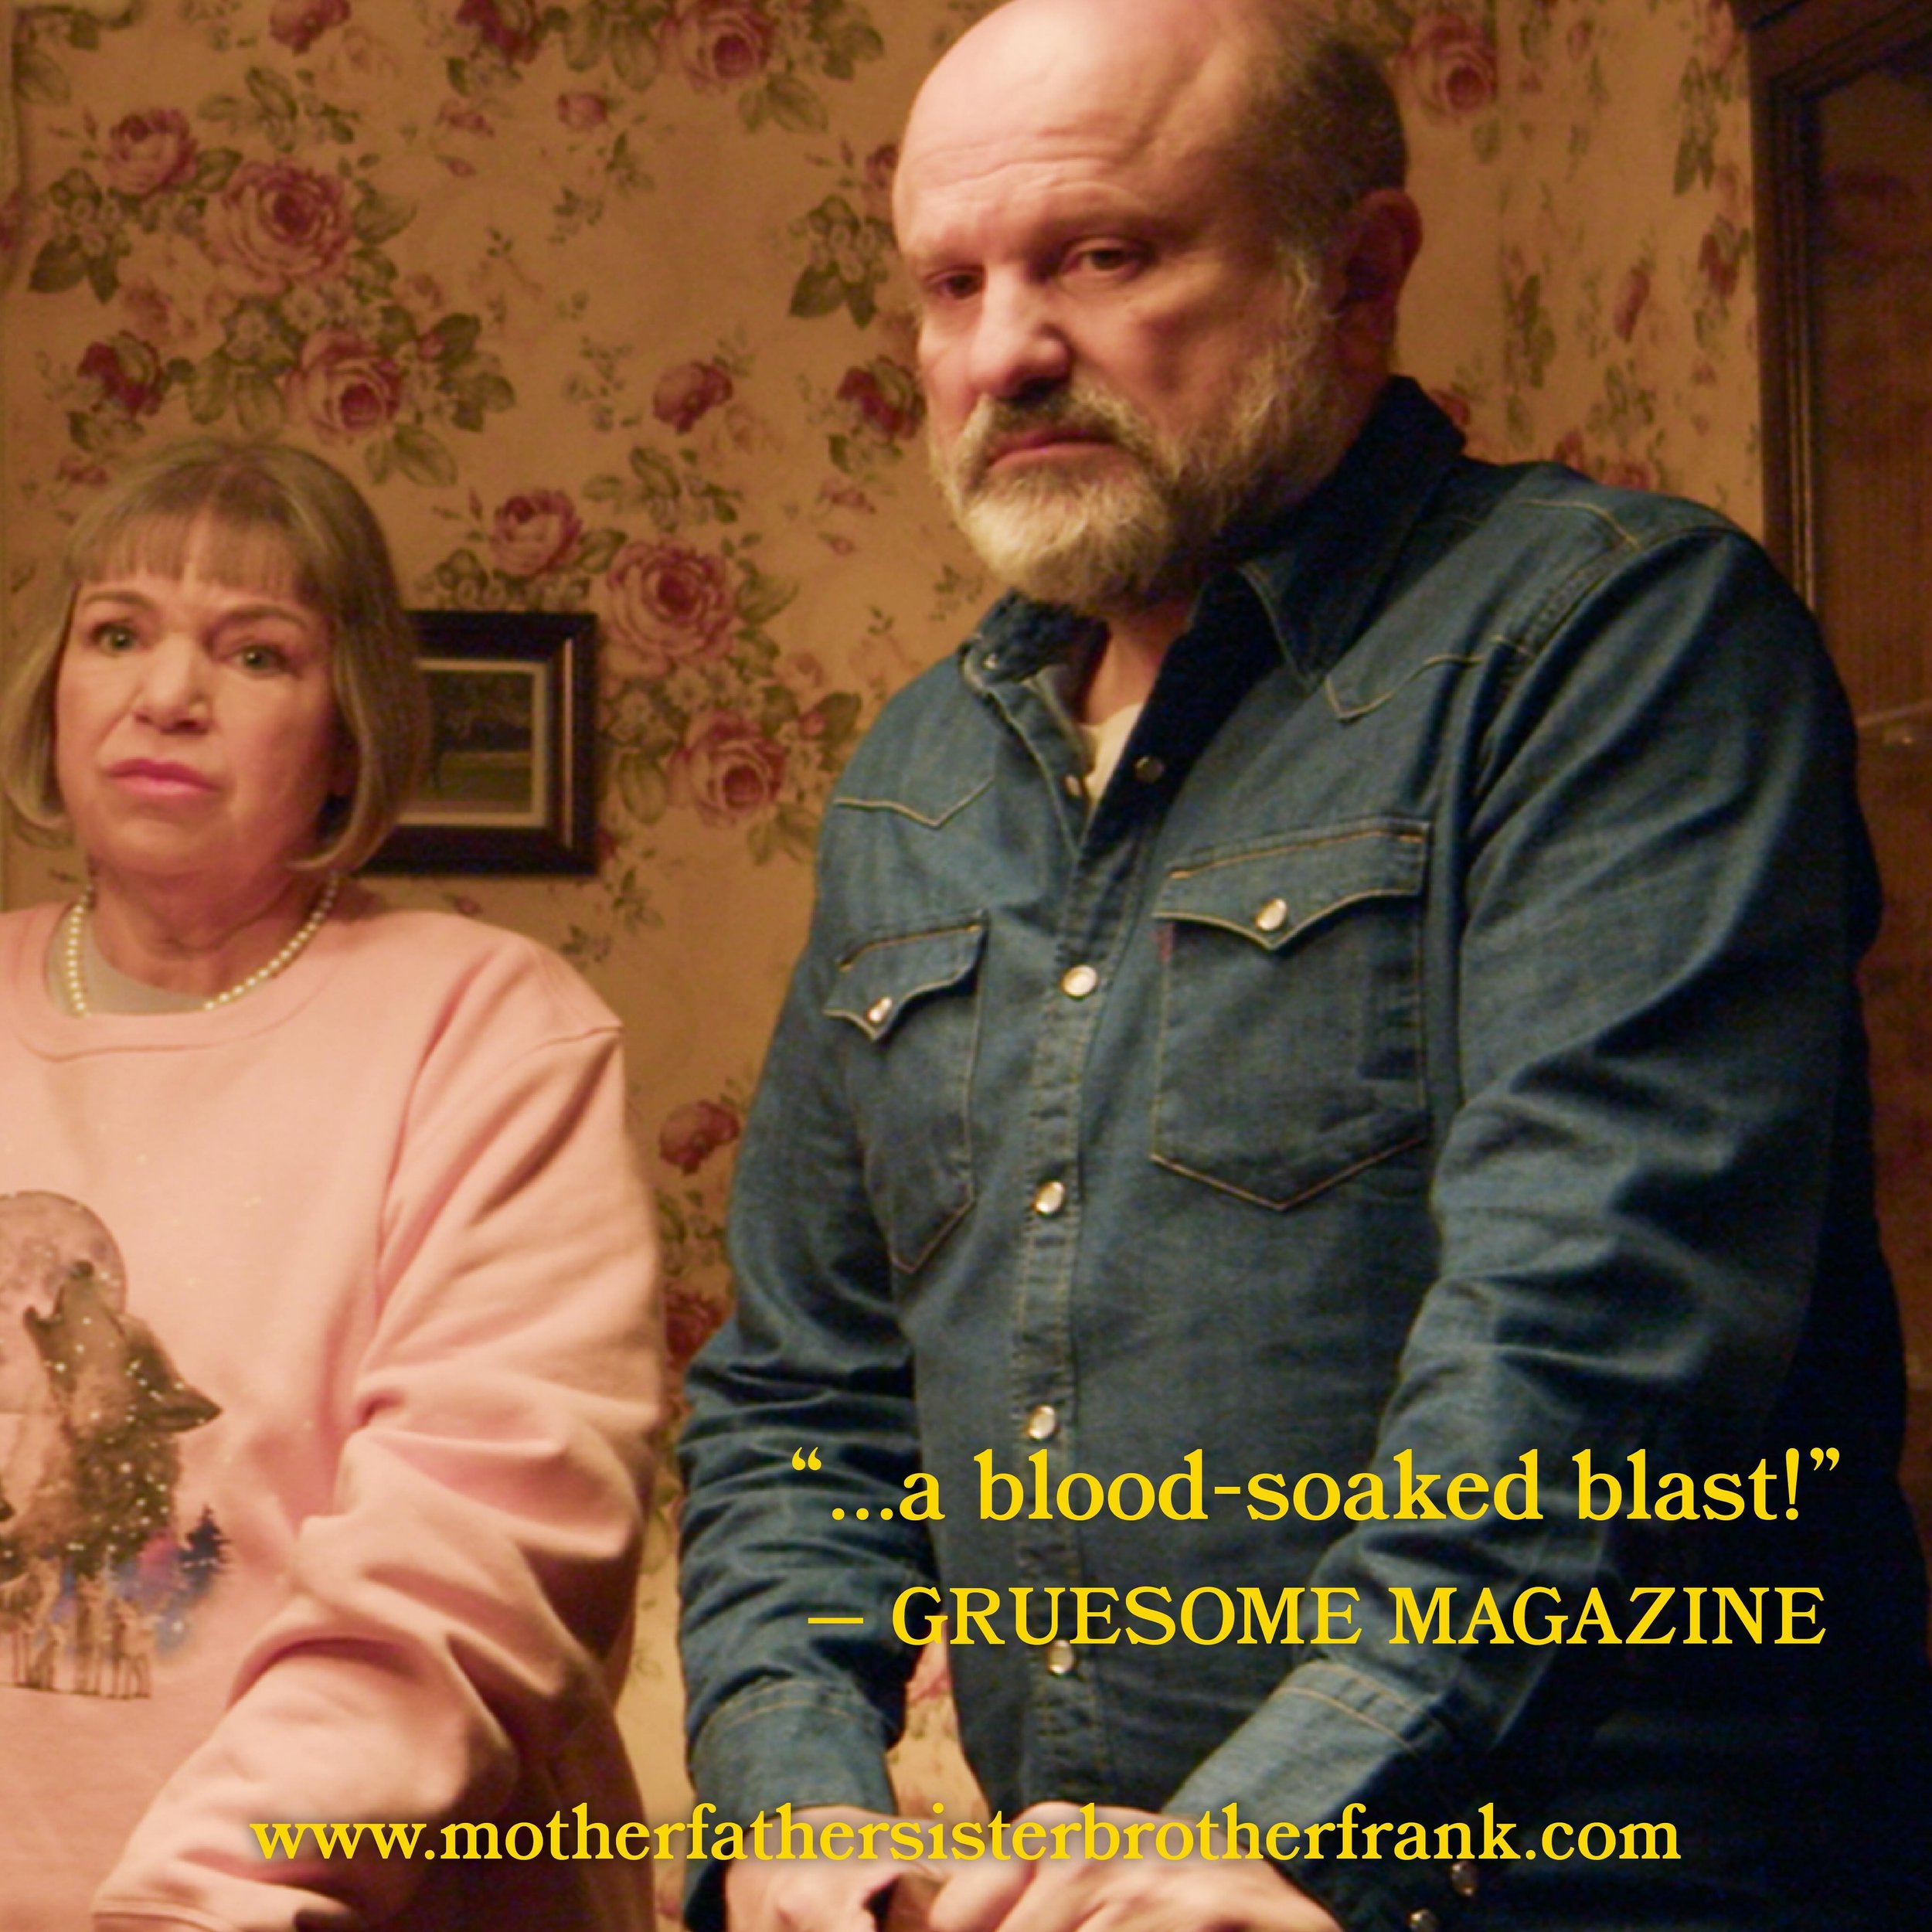 MFSBF Screening times @theartofbklyn !!
🎞️🥳 OPENING NIGHT FILM!! 🥳🎞️ 
THURSDAY, May 30th @ 8:00 PM
Link for tix in our bio!!
🔪☠️🥧 #MFSBF
.
Mindy Cohn and Enrico Colantoni in MOTHER FATHER SISTER BROTHER FRANK
.
.
.
.
.
.
Written &amp; Directed 